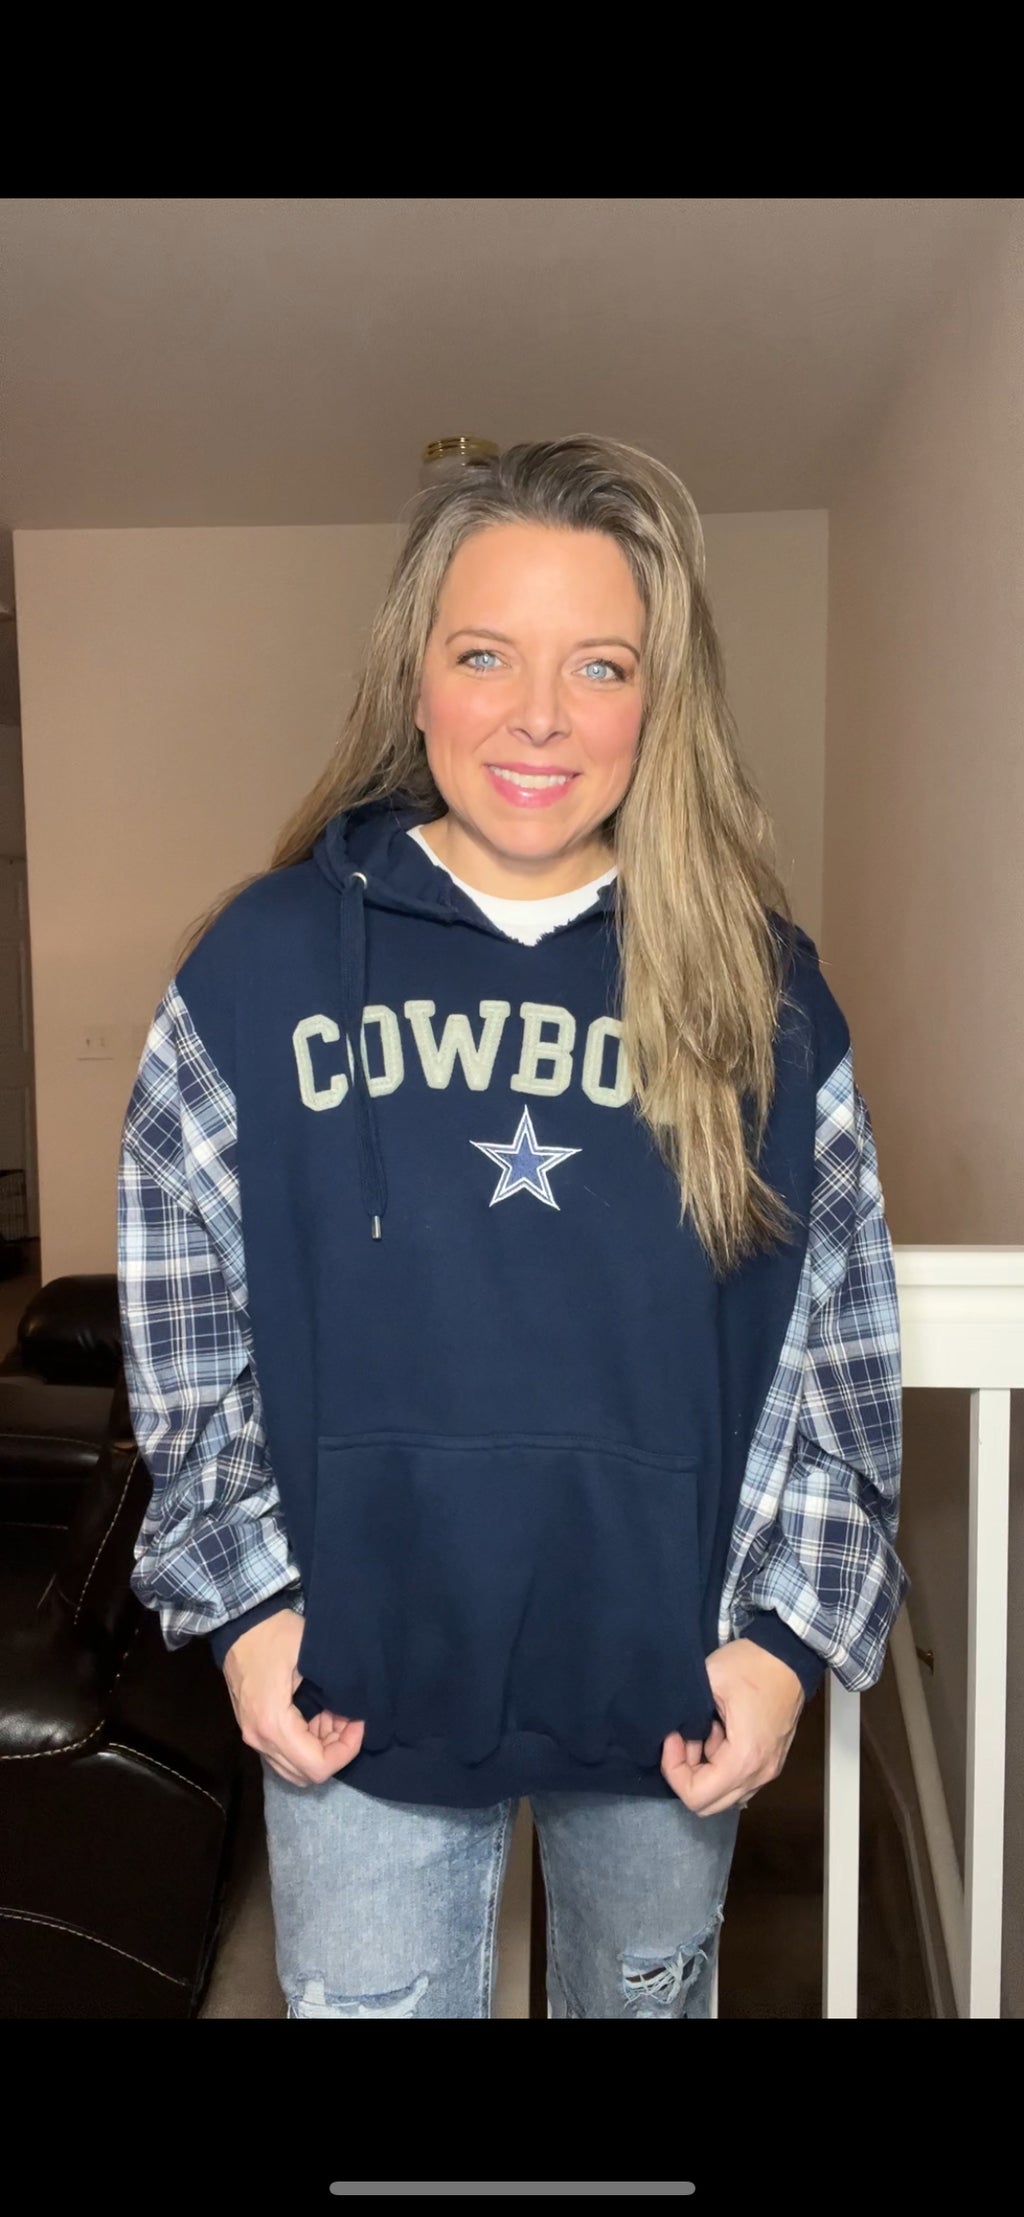 Cowboys – women’s XL/1X – thick sweatshirt with cotton sleeves